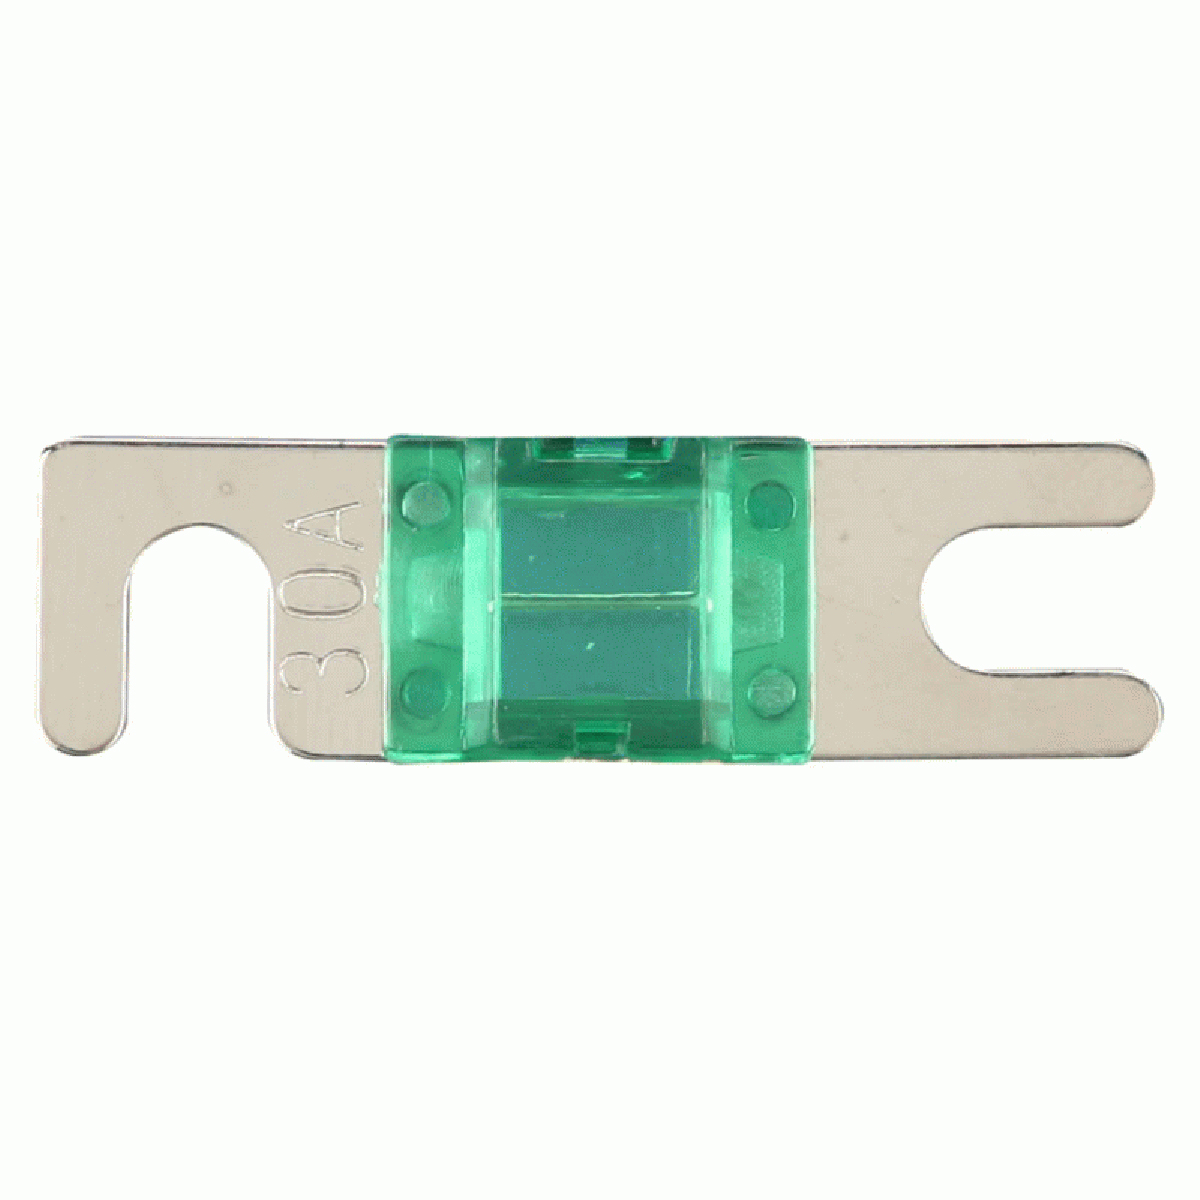 MINI ANL 30 AMP FUSE PACKAGE OF 2